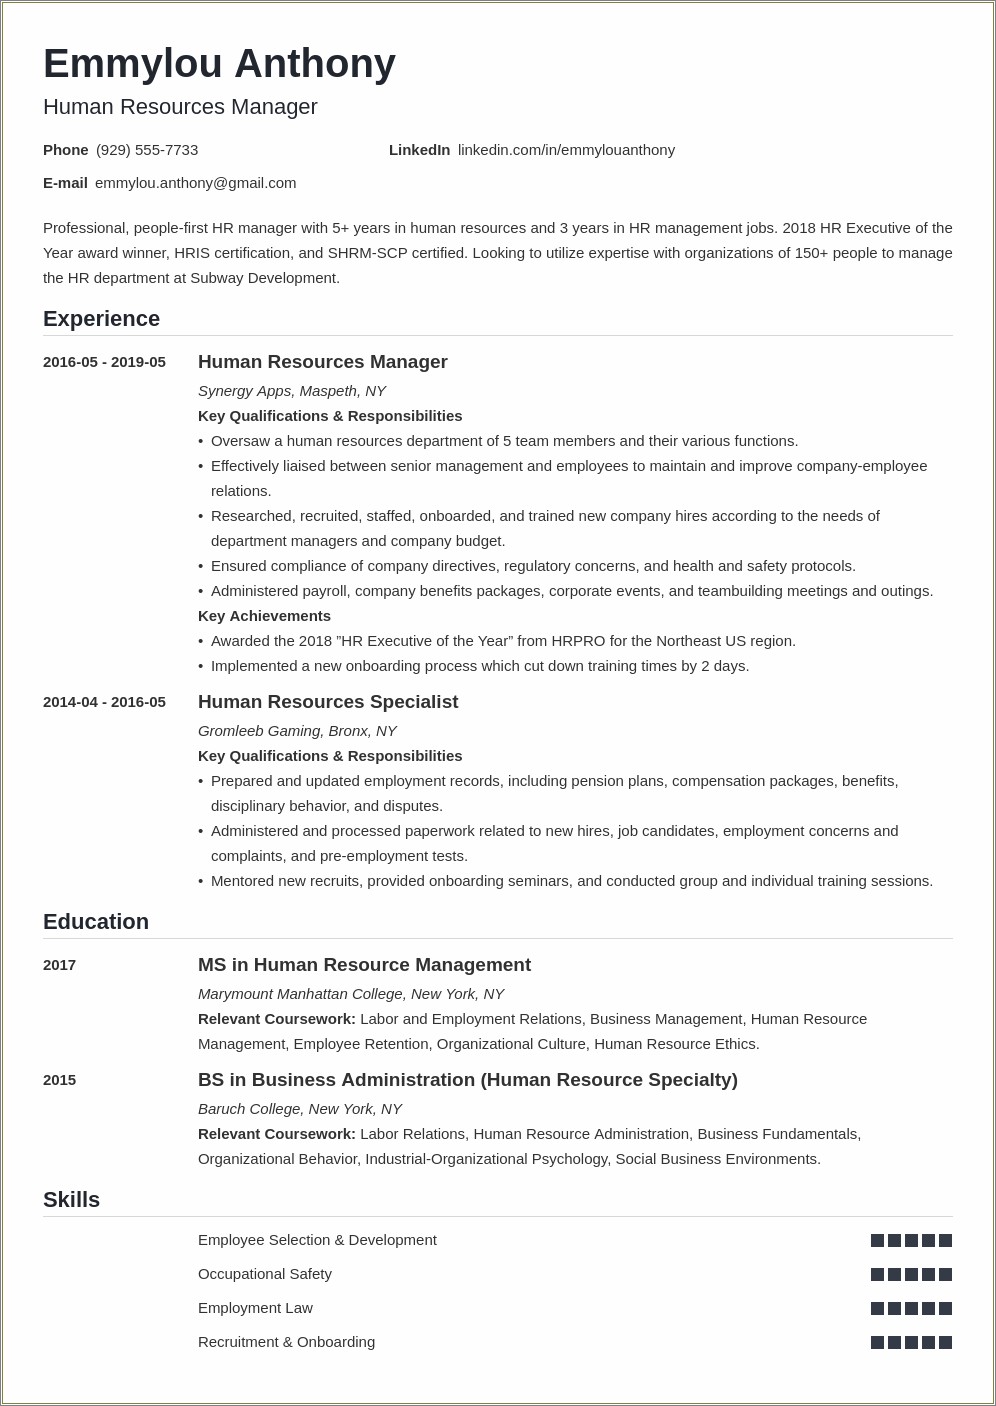 Sample Resume For Human Services Position